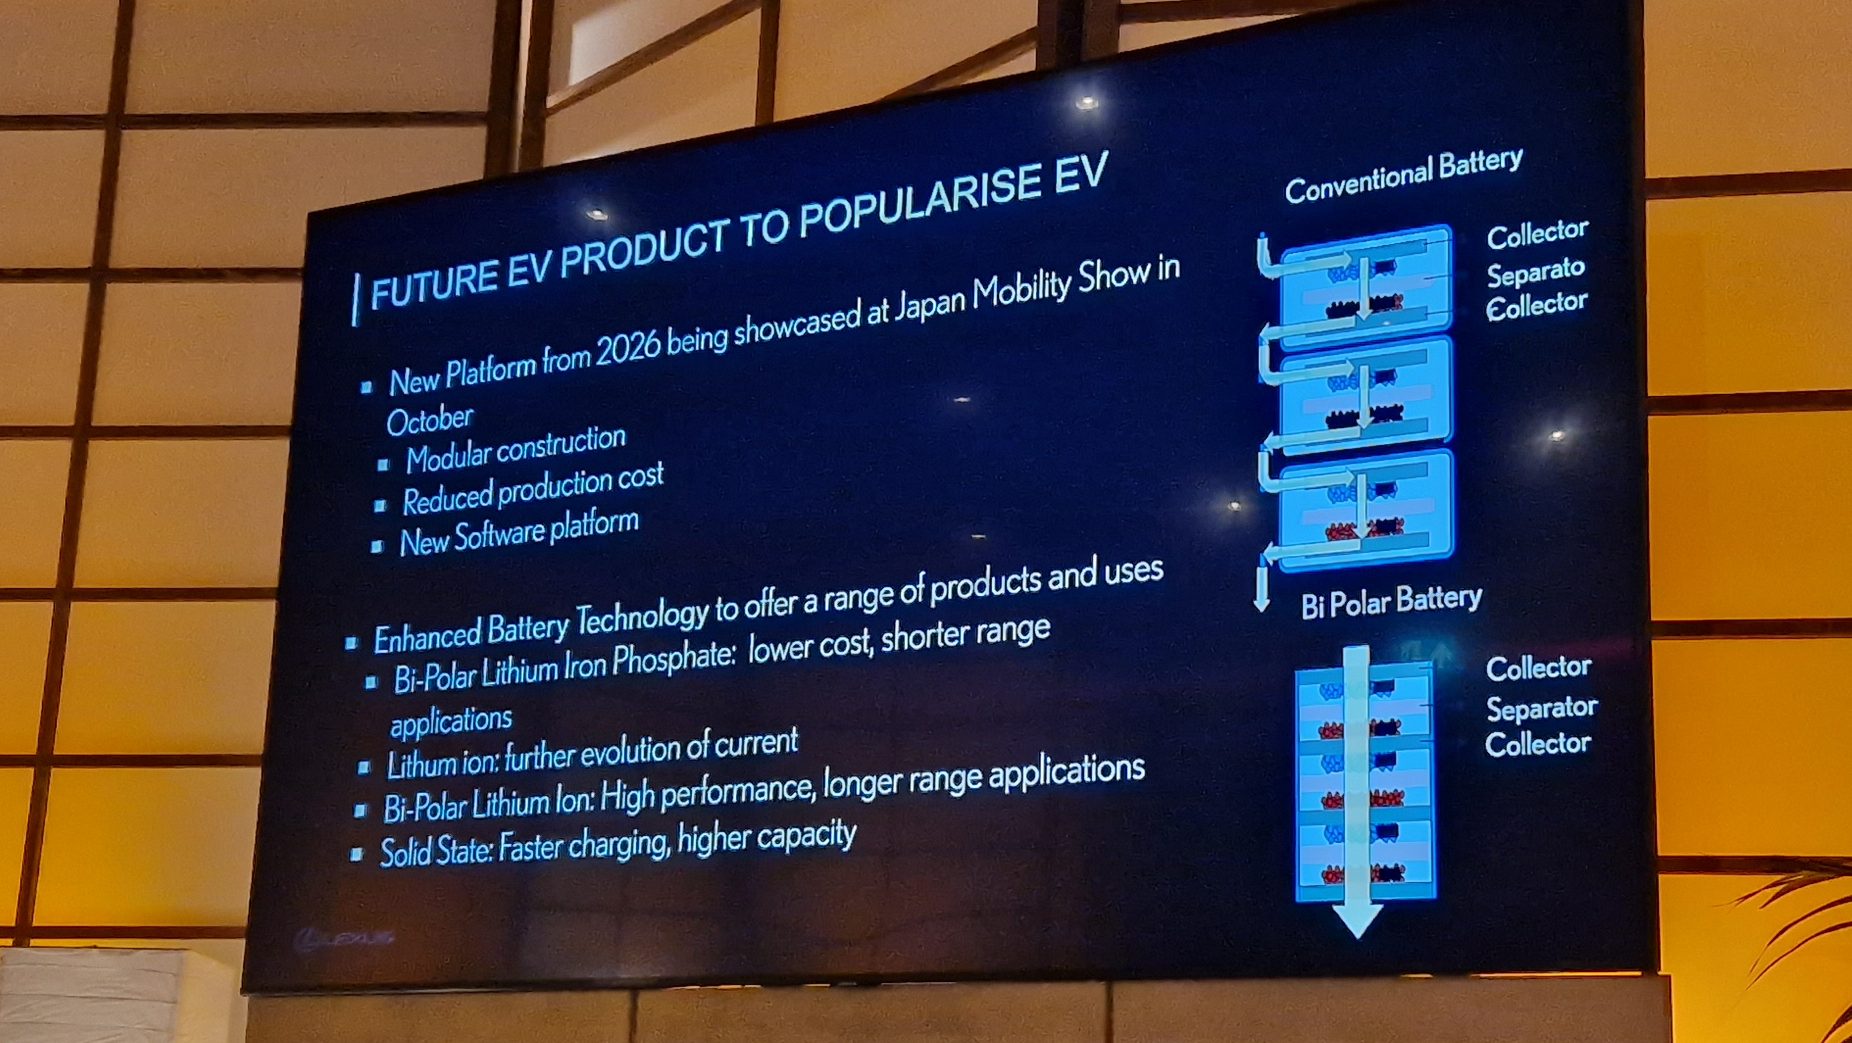 A slide during the Lexus LM briefing showed the range of battery technologies being developed.